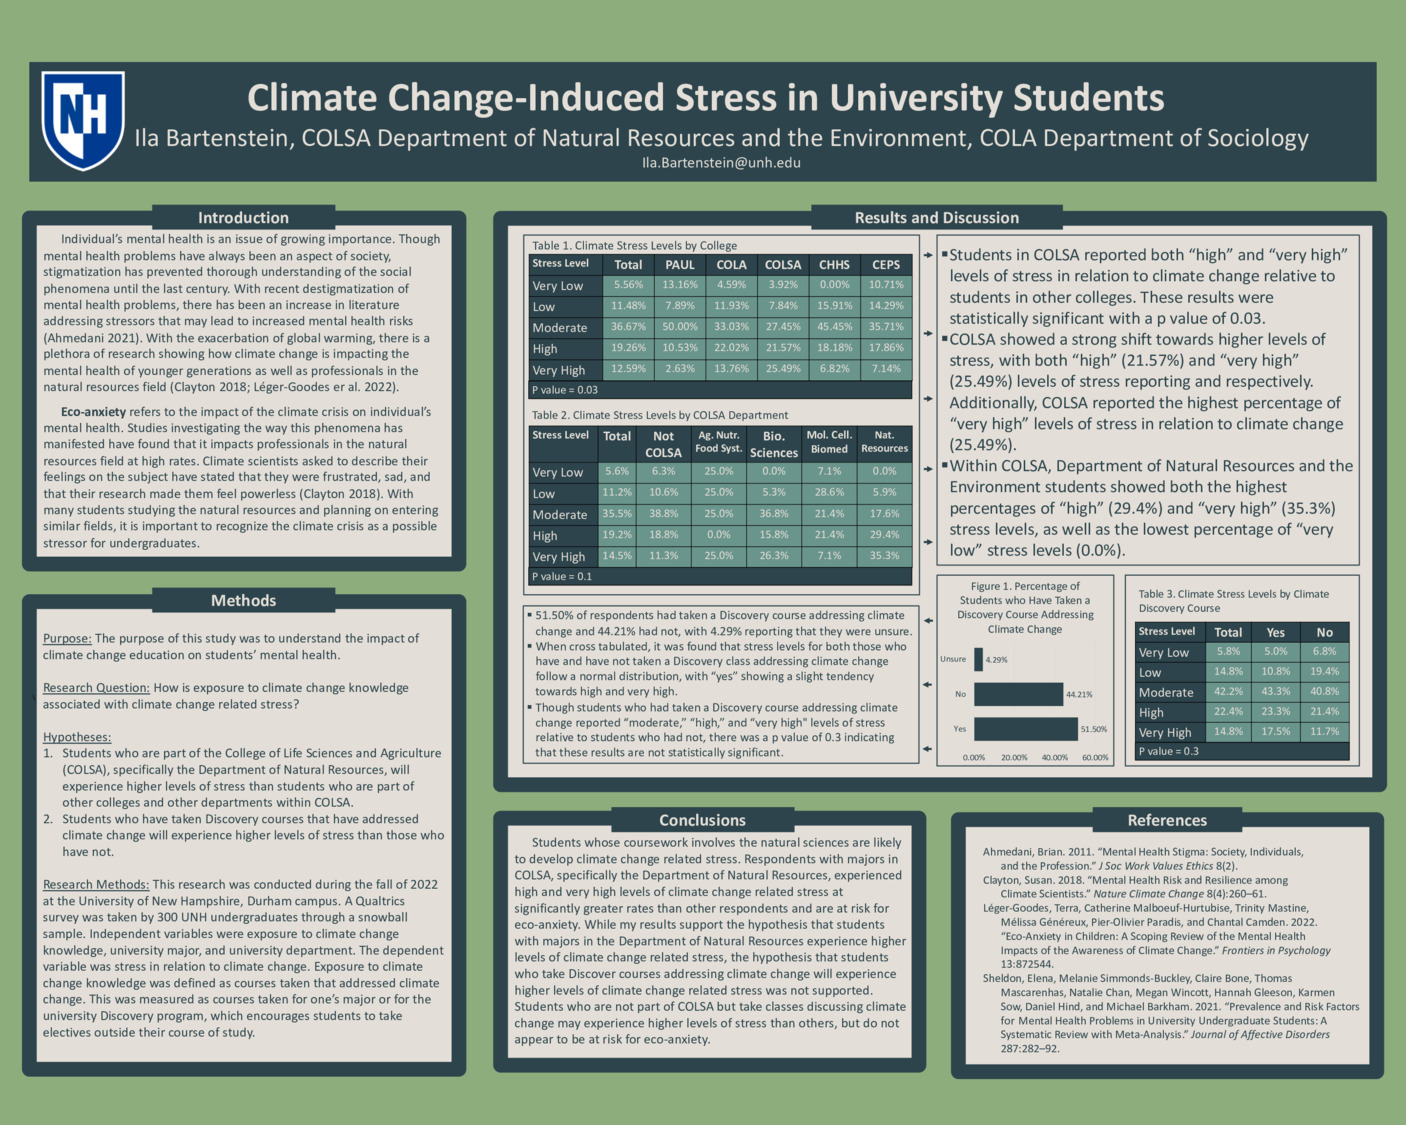 Climate Change-Induced Stress In University Students by ilb1005